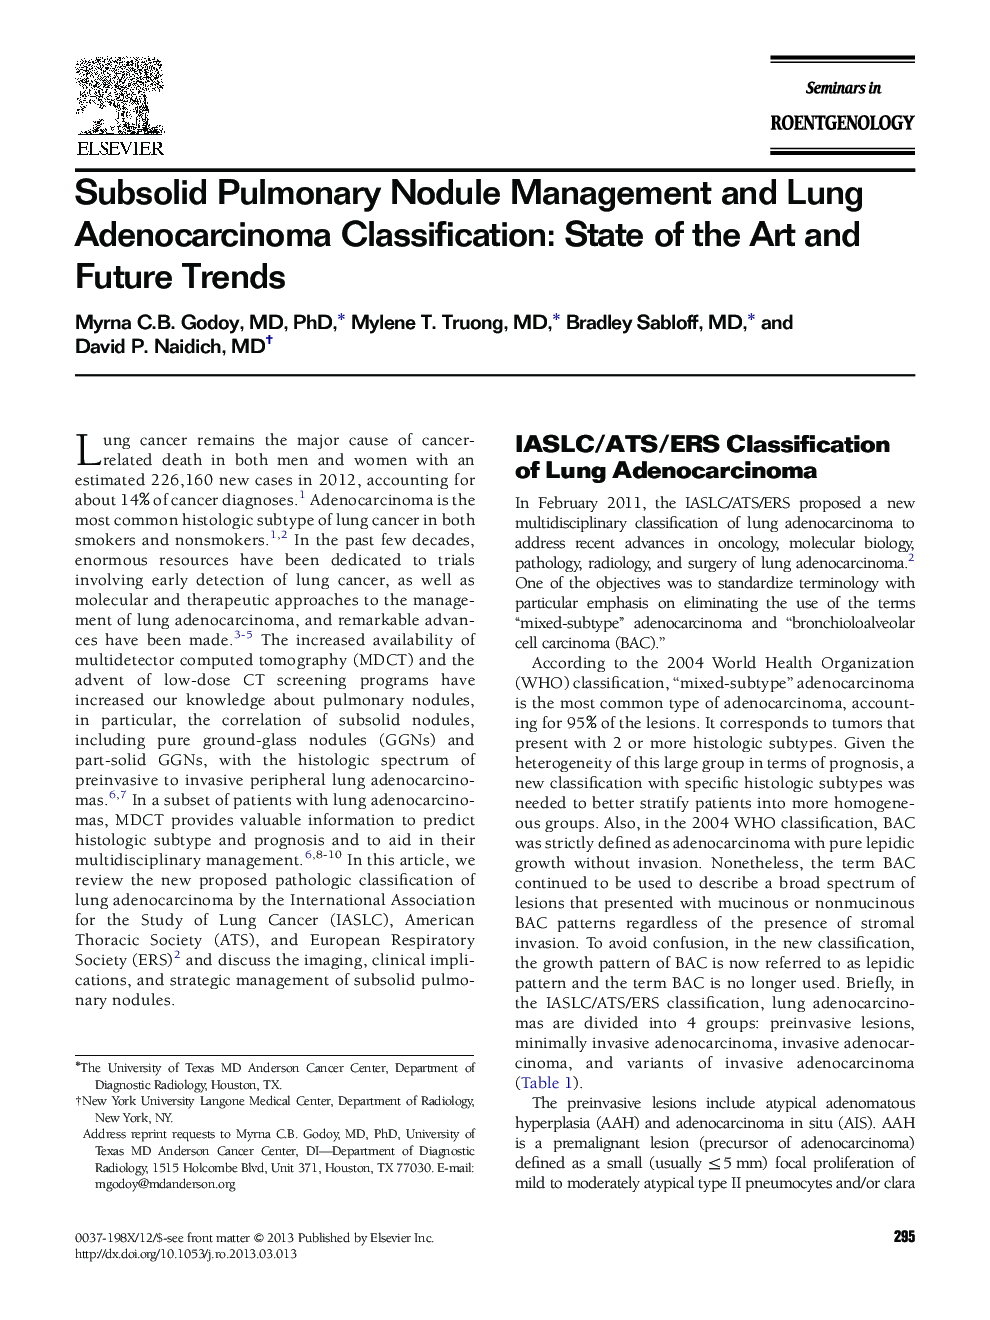 Subsolid Pulmonary Nodule Management and Lung Adenocarcinoma Classification: State of the Art and Future Trends